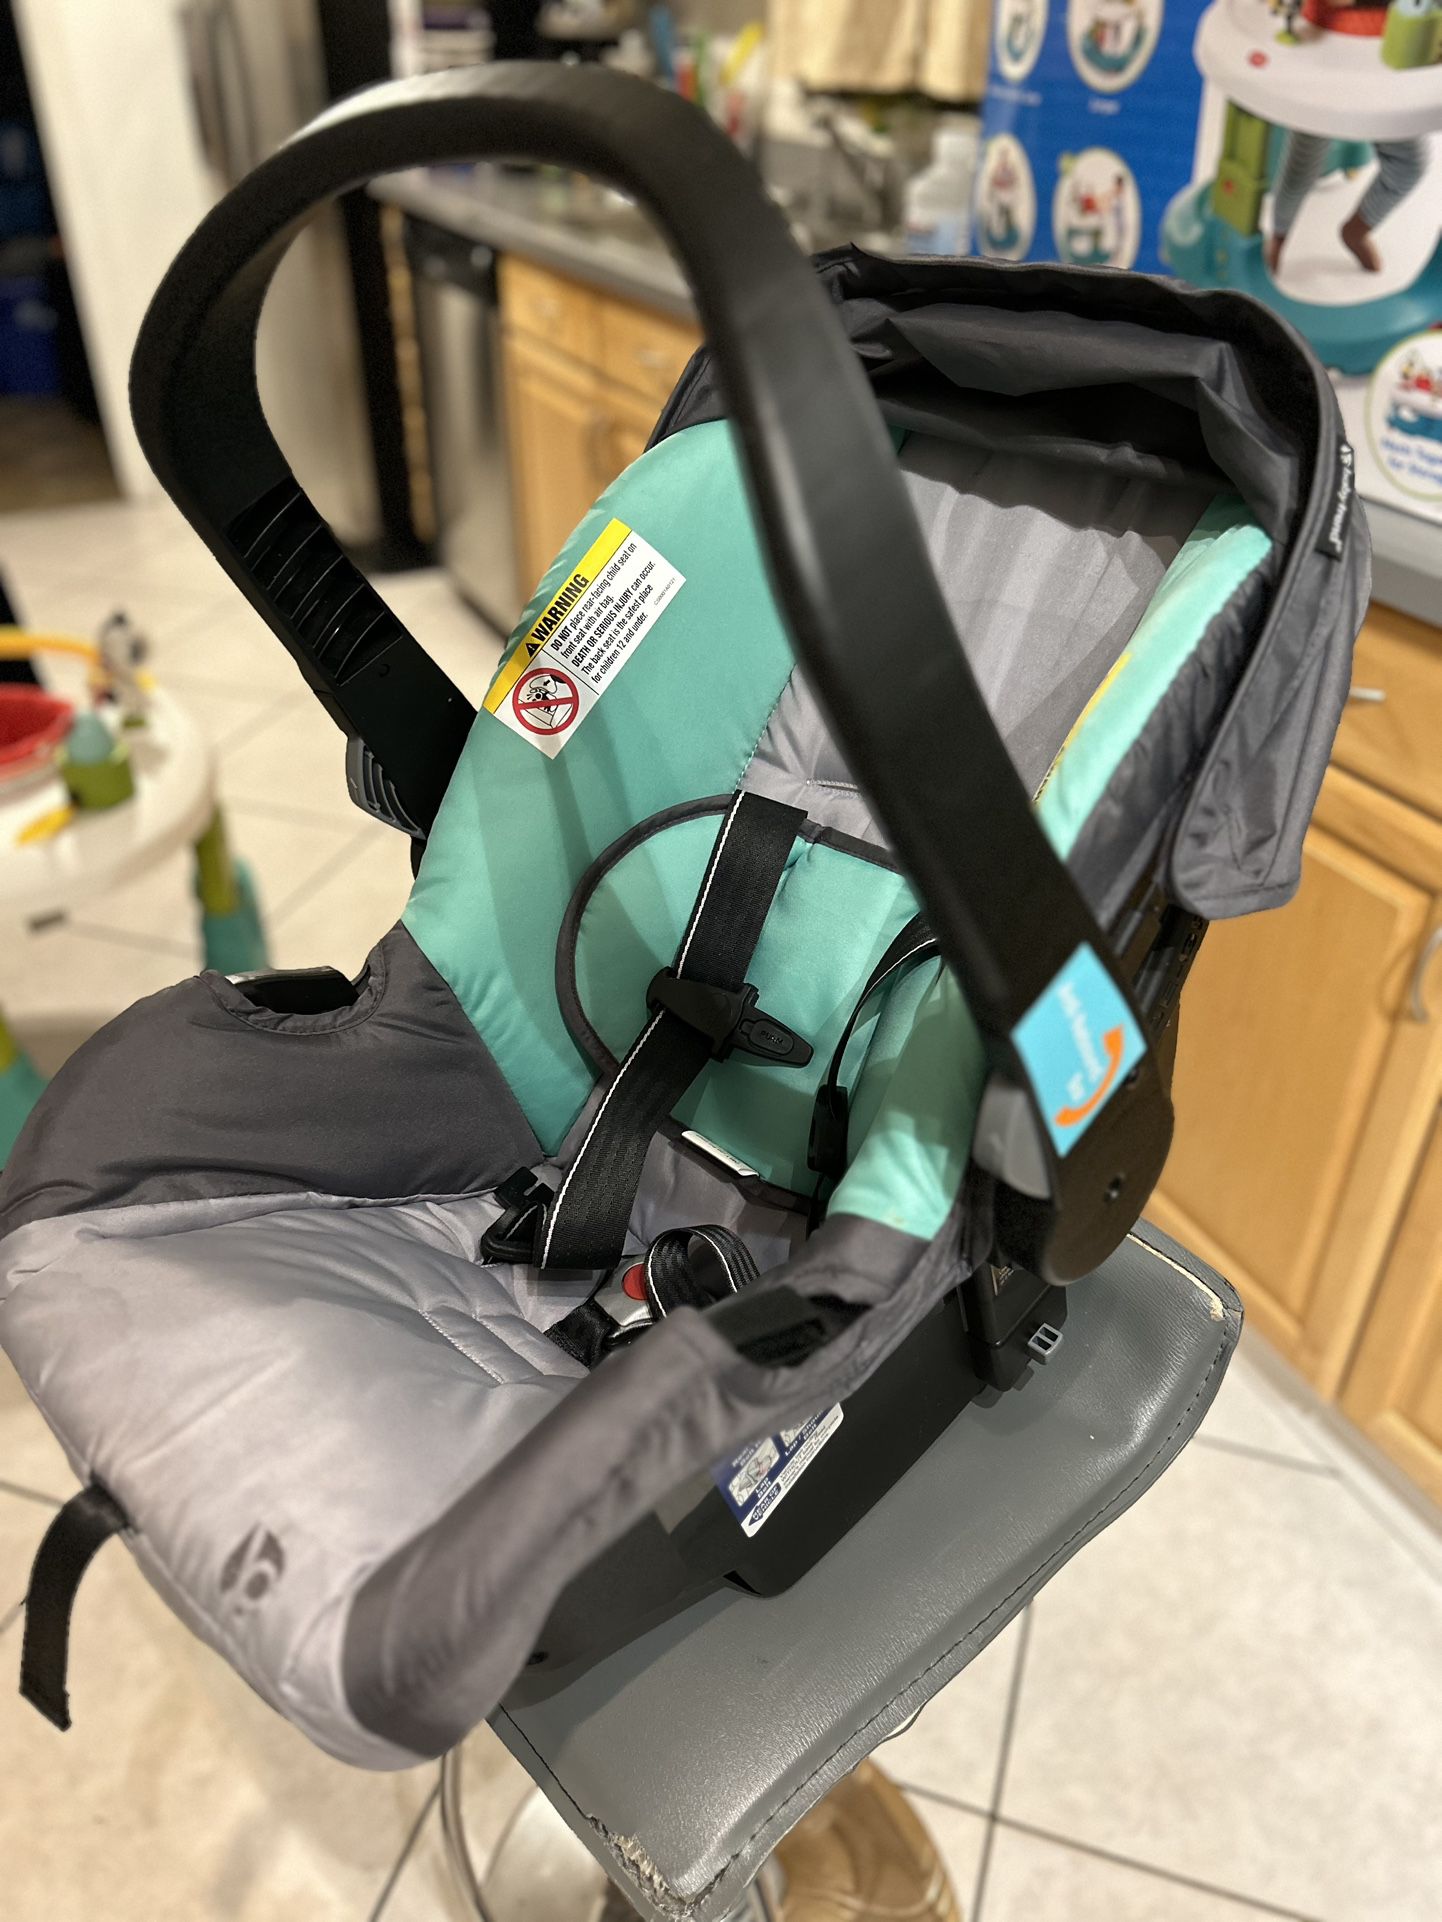 Baby Trend Infant car seat LIKE NEW